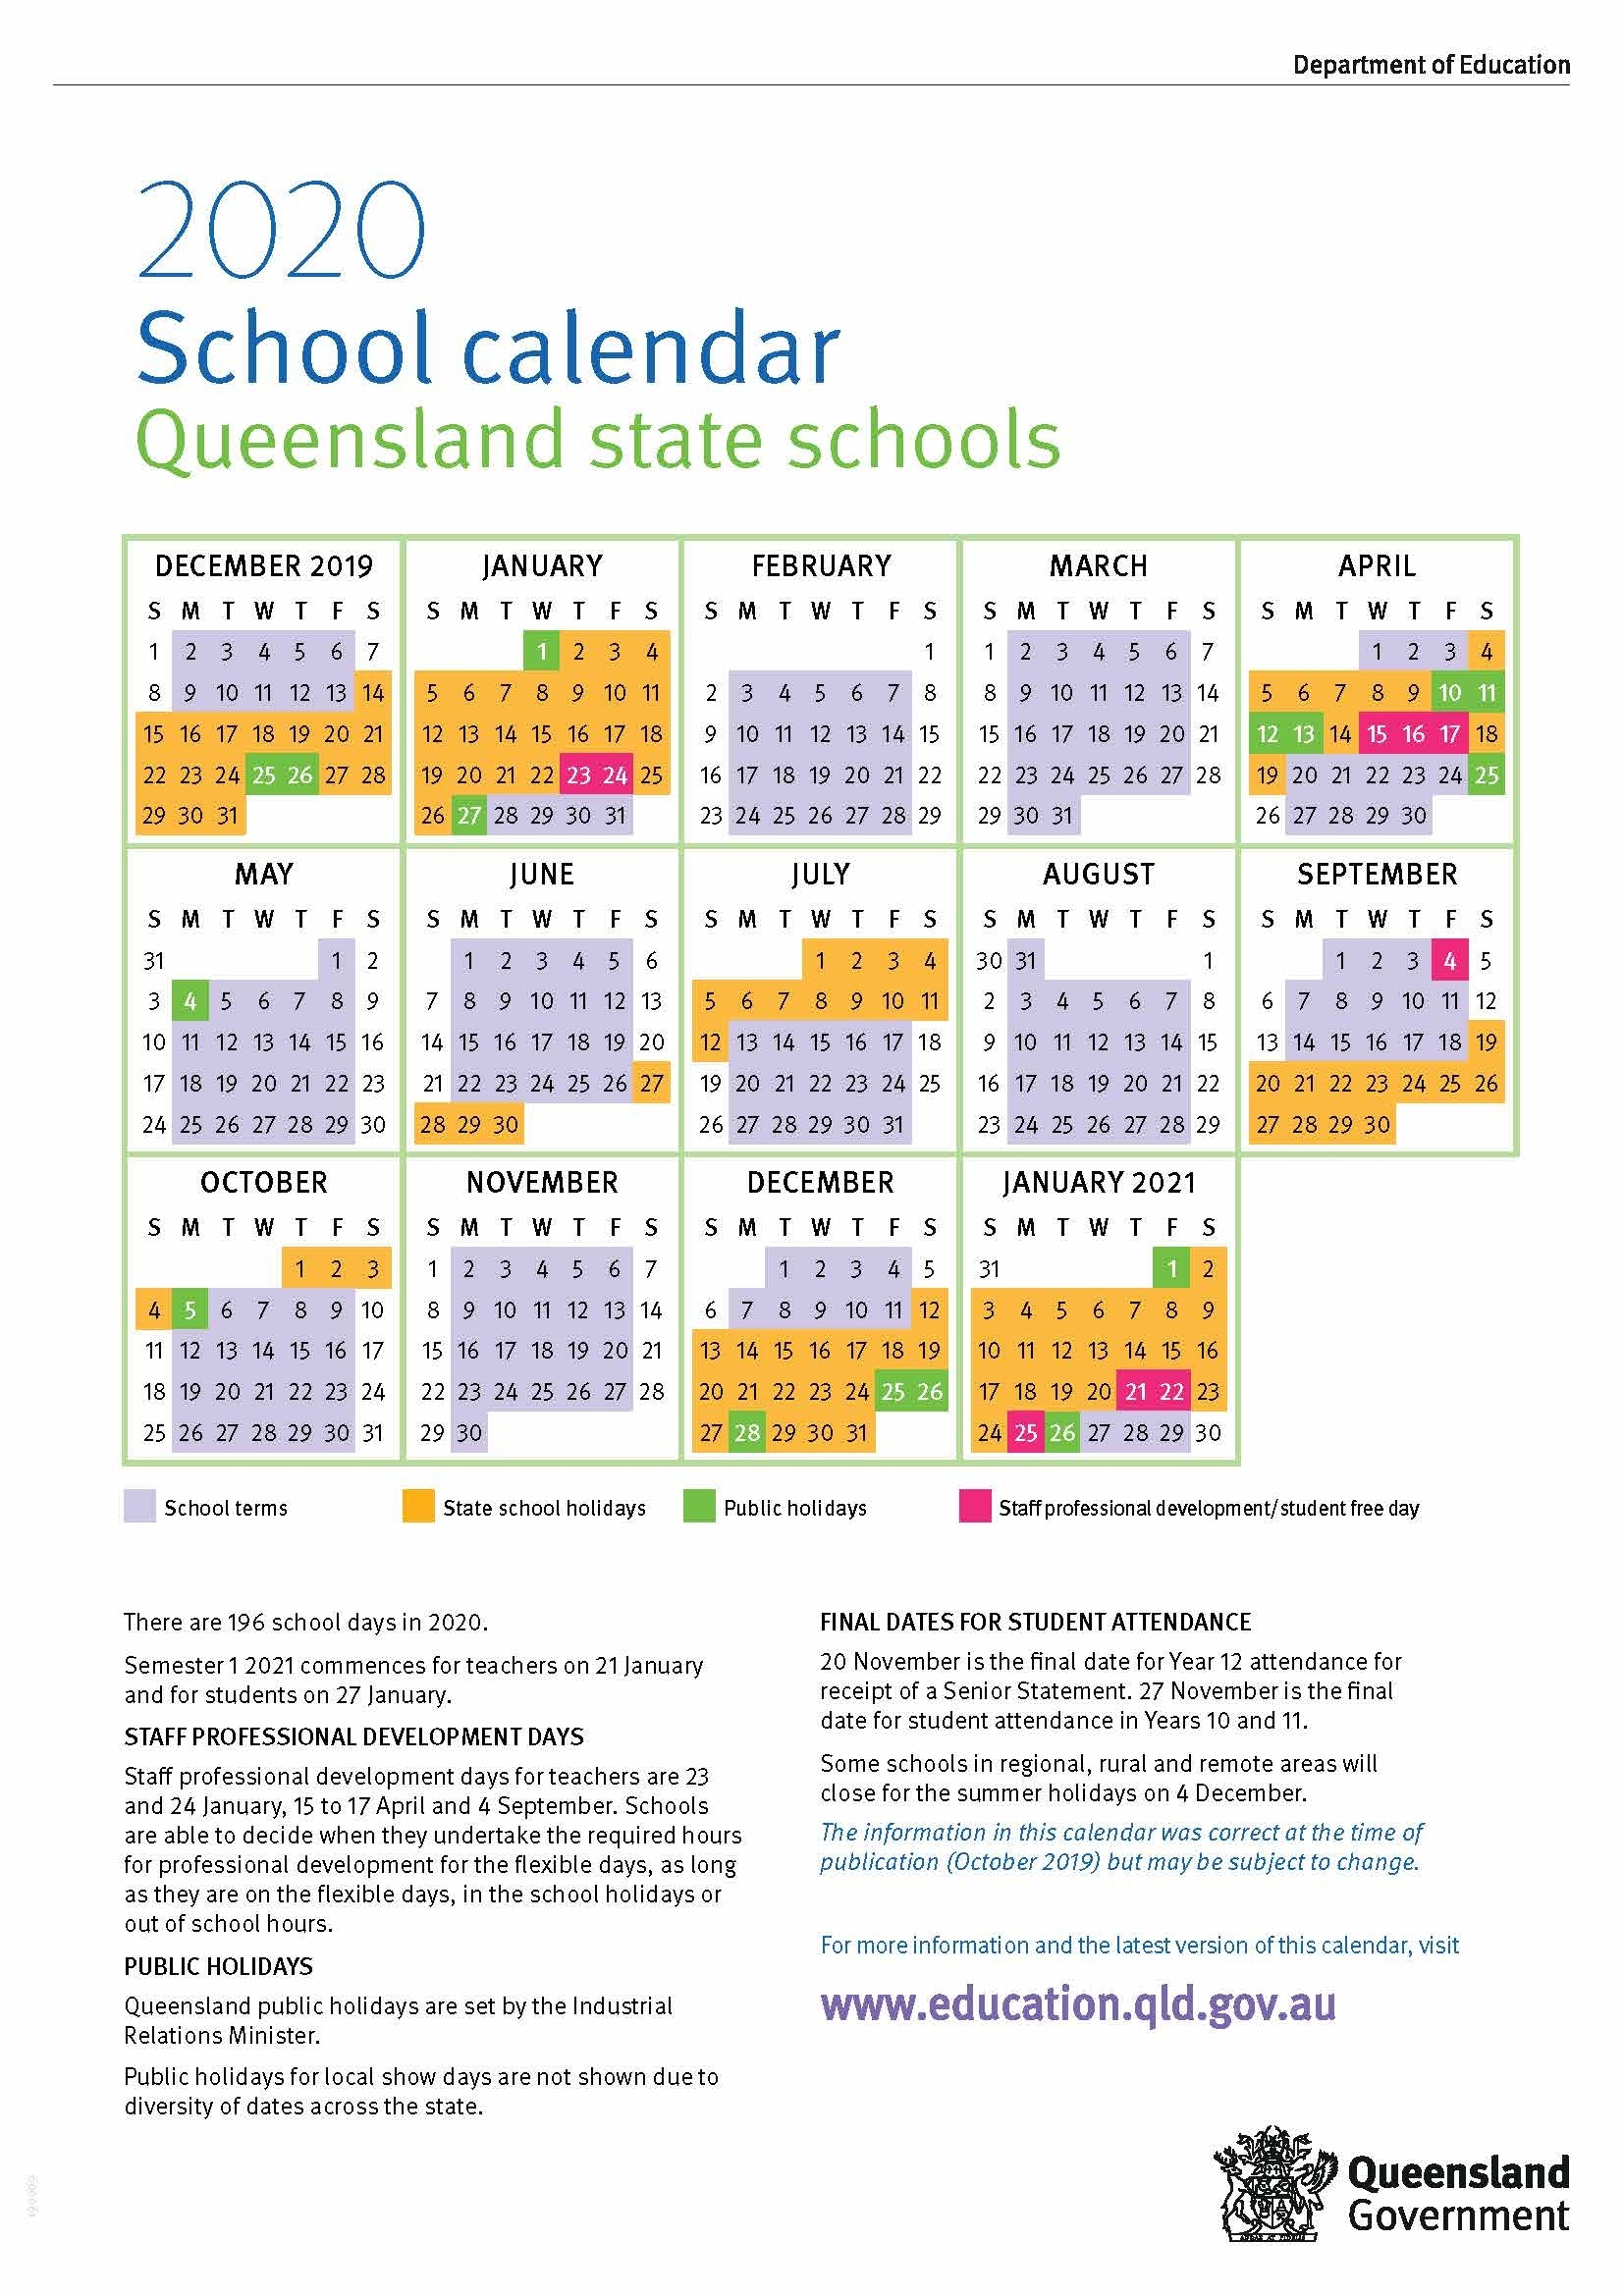 2020 Queensland State School Calendar Calendar For Year 2020 Queensland With All Holidays